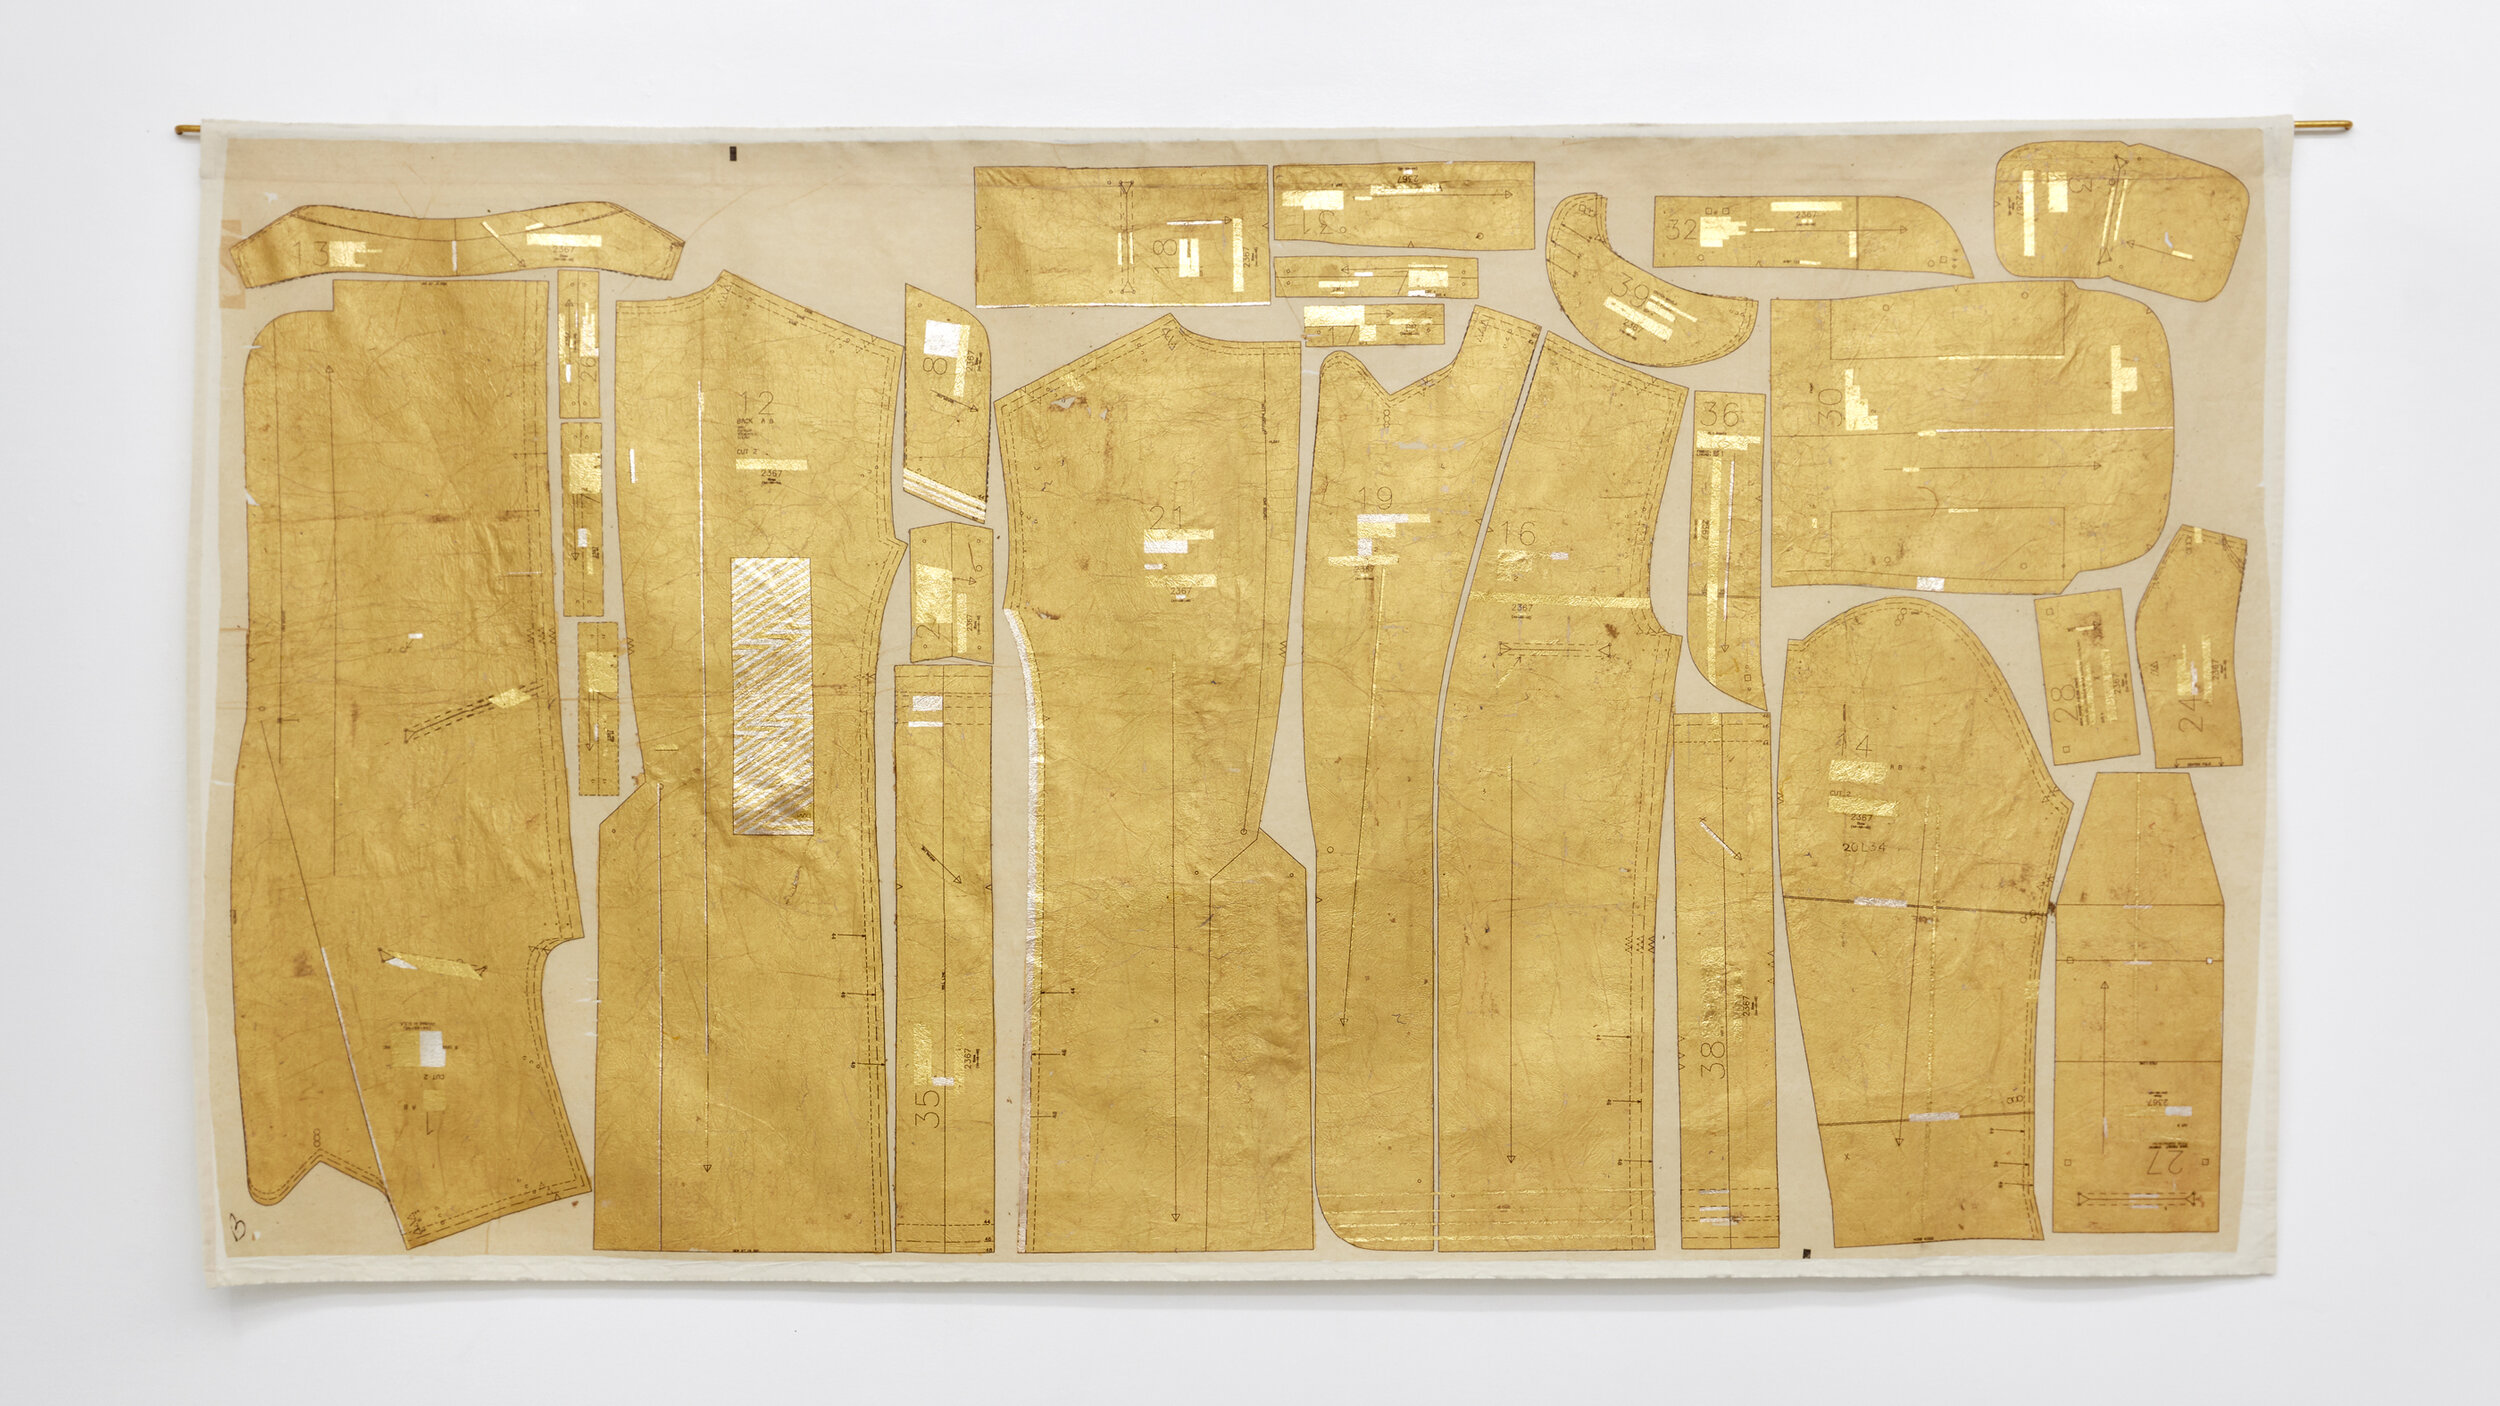   pachuco, pacha, p'alante , 2019 pattern paper and gold leaf on muslin 50 x 90 inches (127 x 229 cm) 